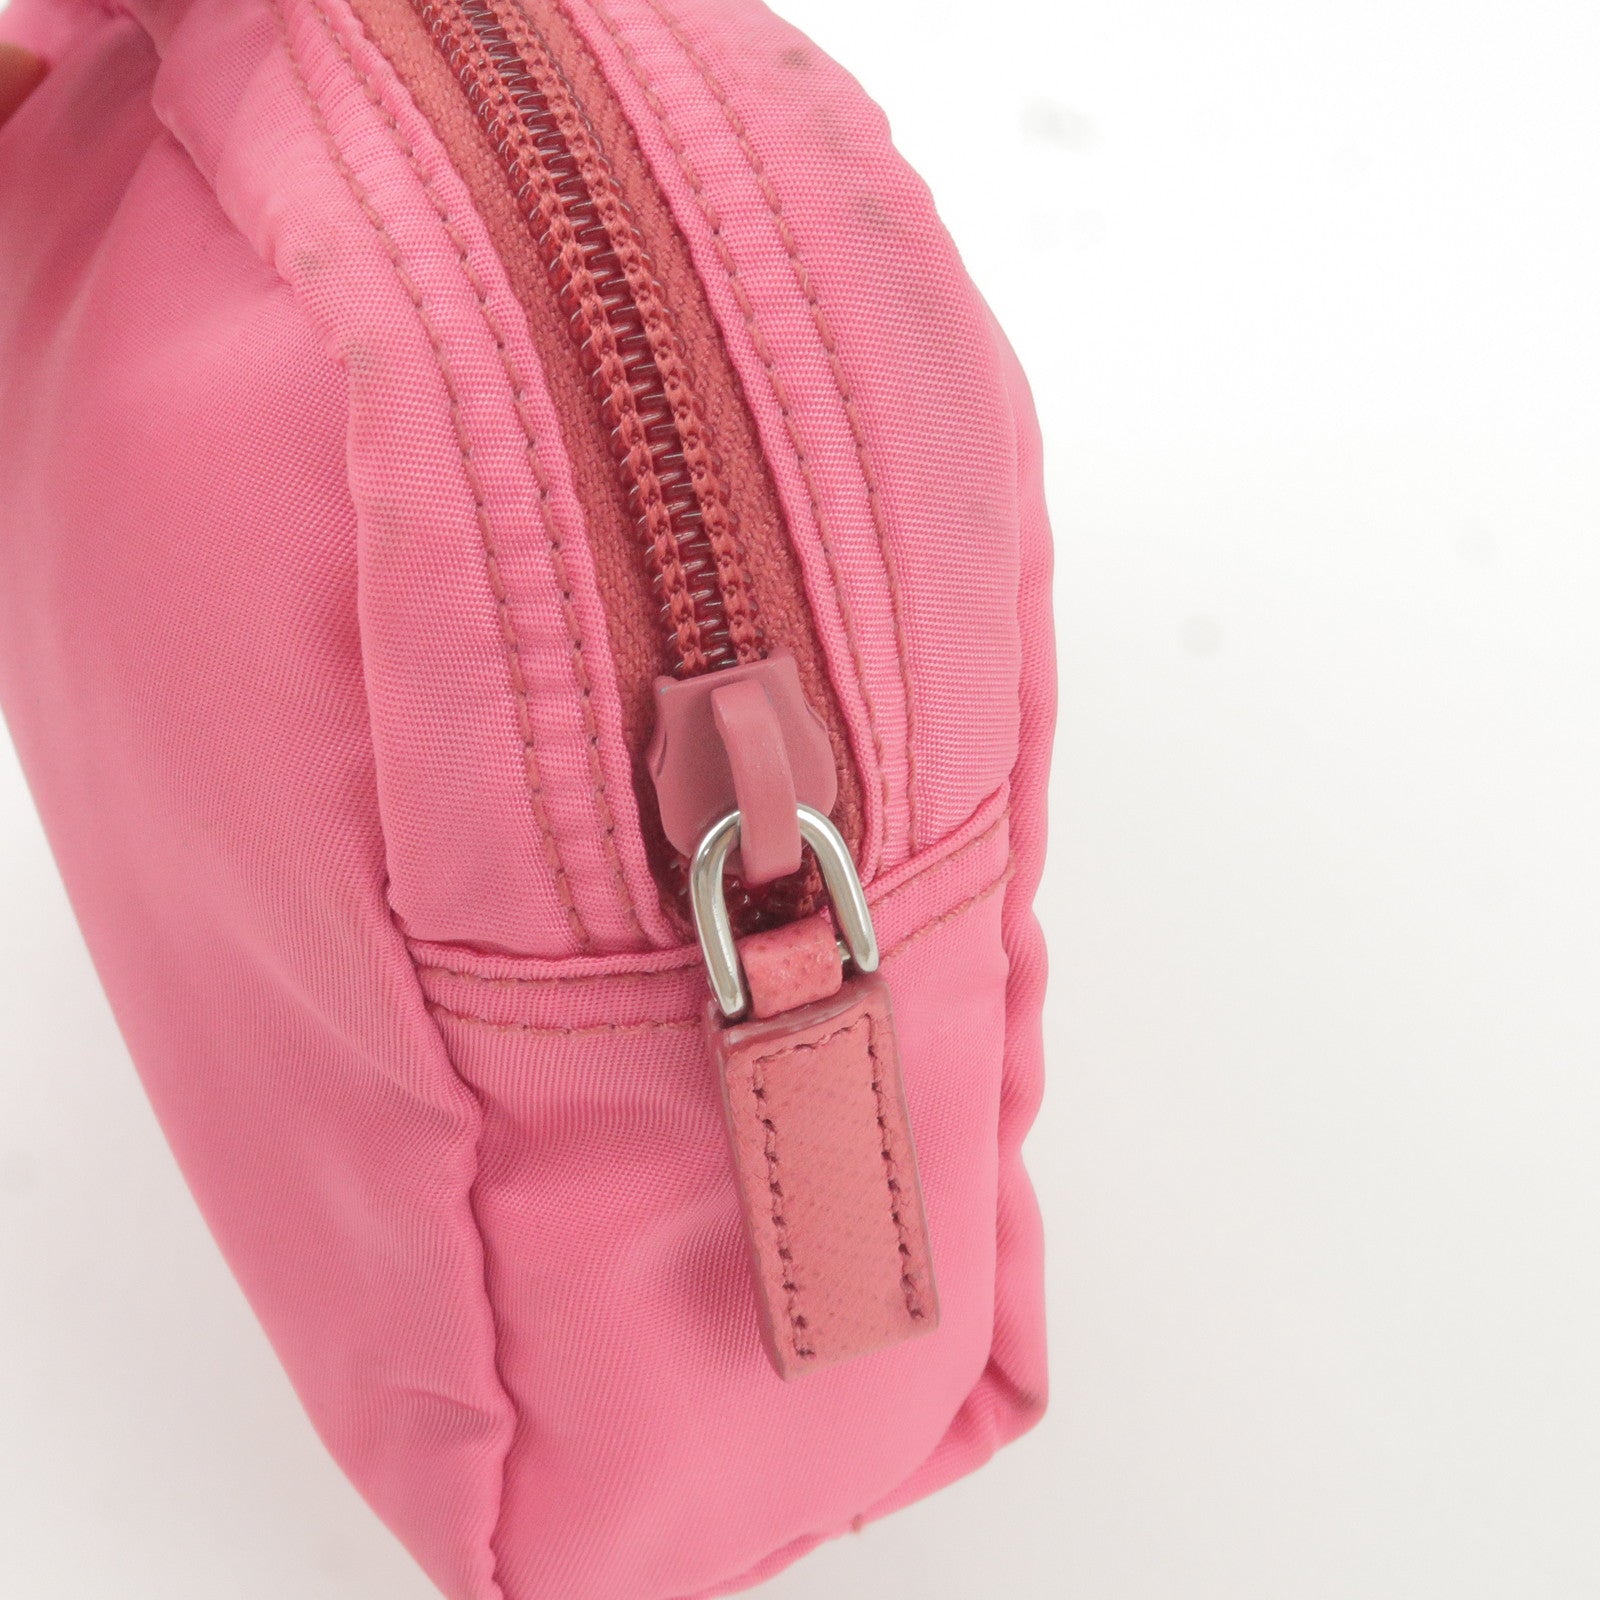 PRADA-Logo-Nylon-Leather-Cosmetic-Pouch-Pink – dct-ep_vintage luxury Store